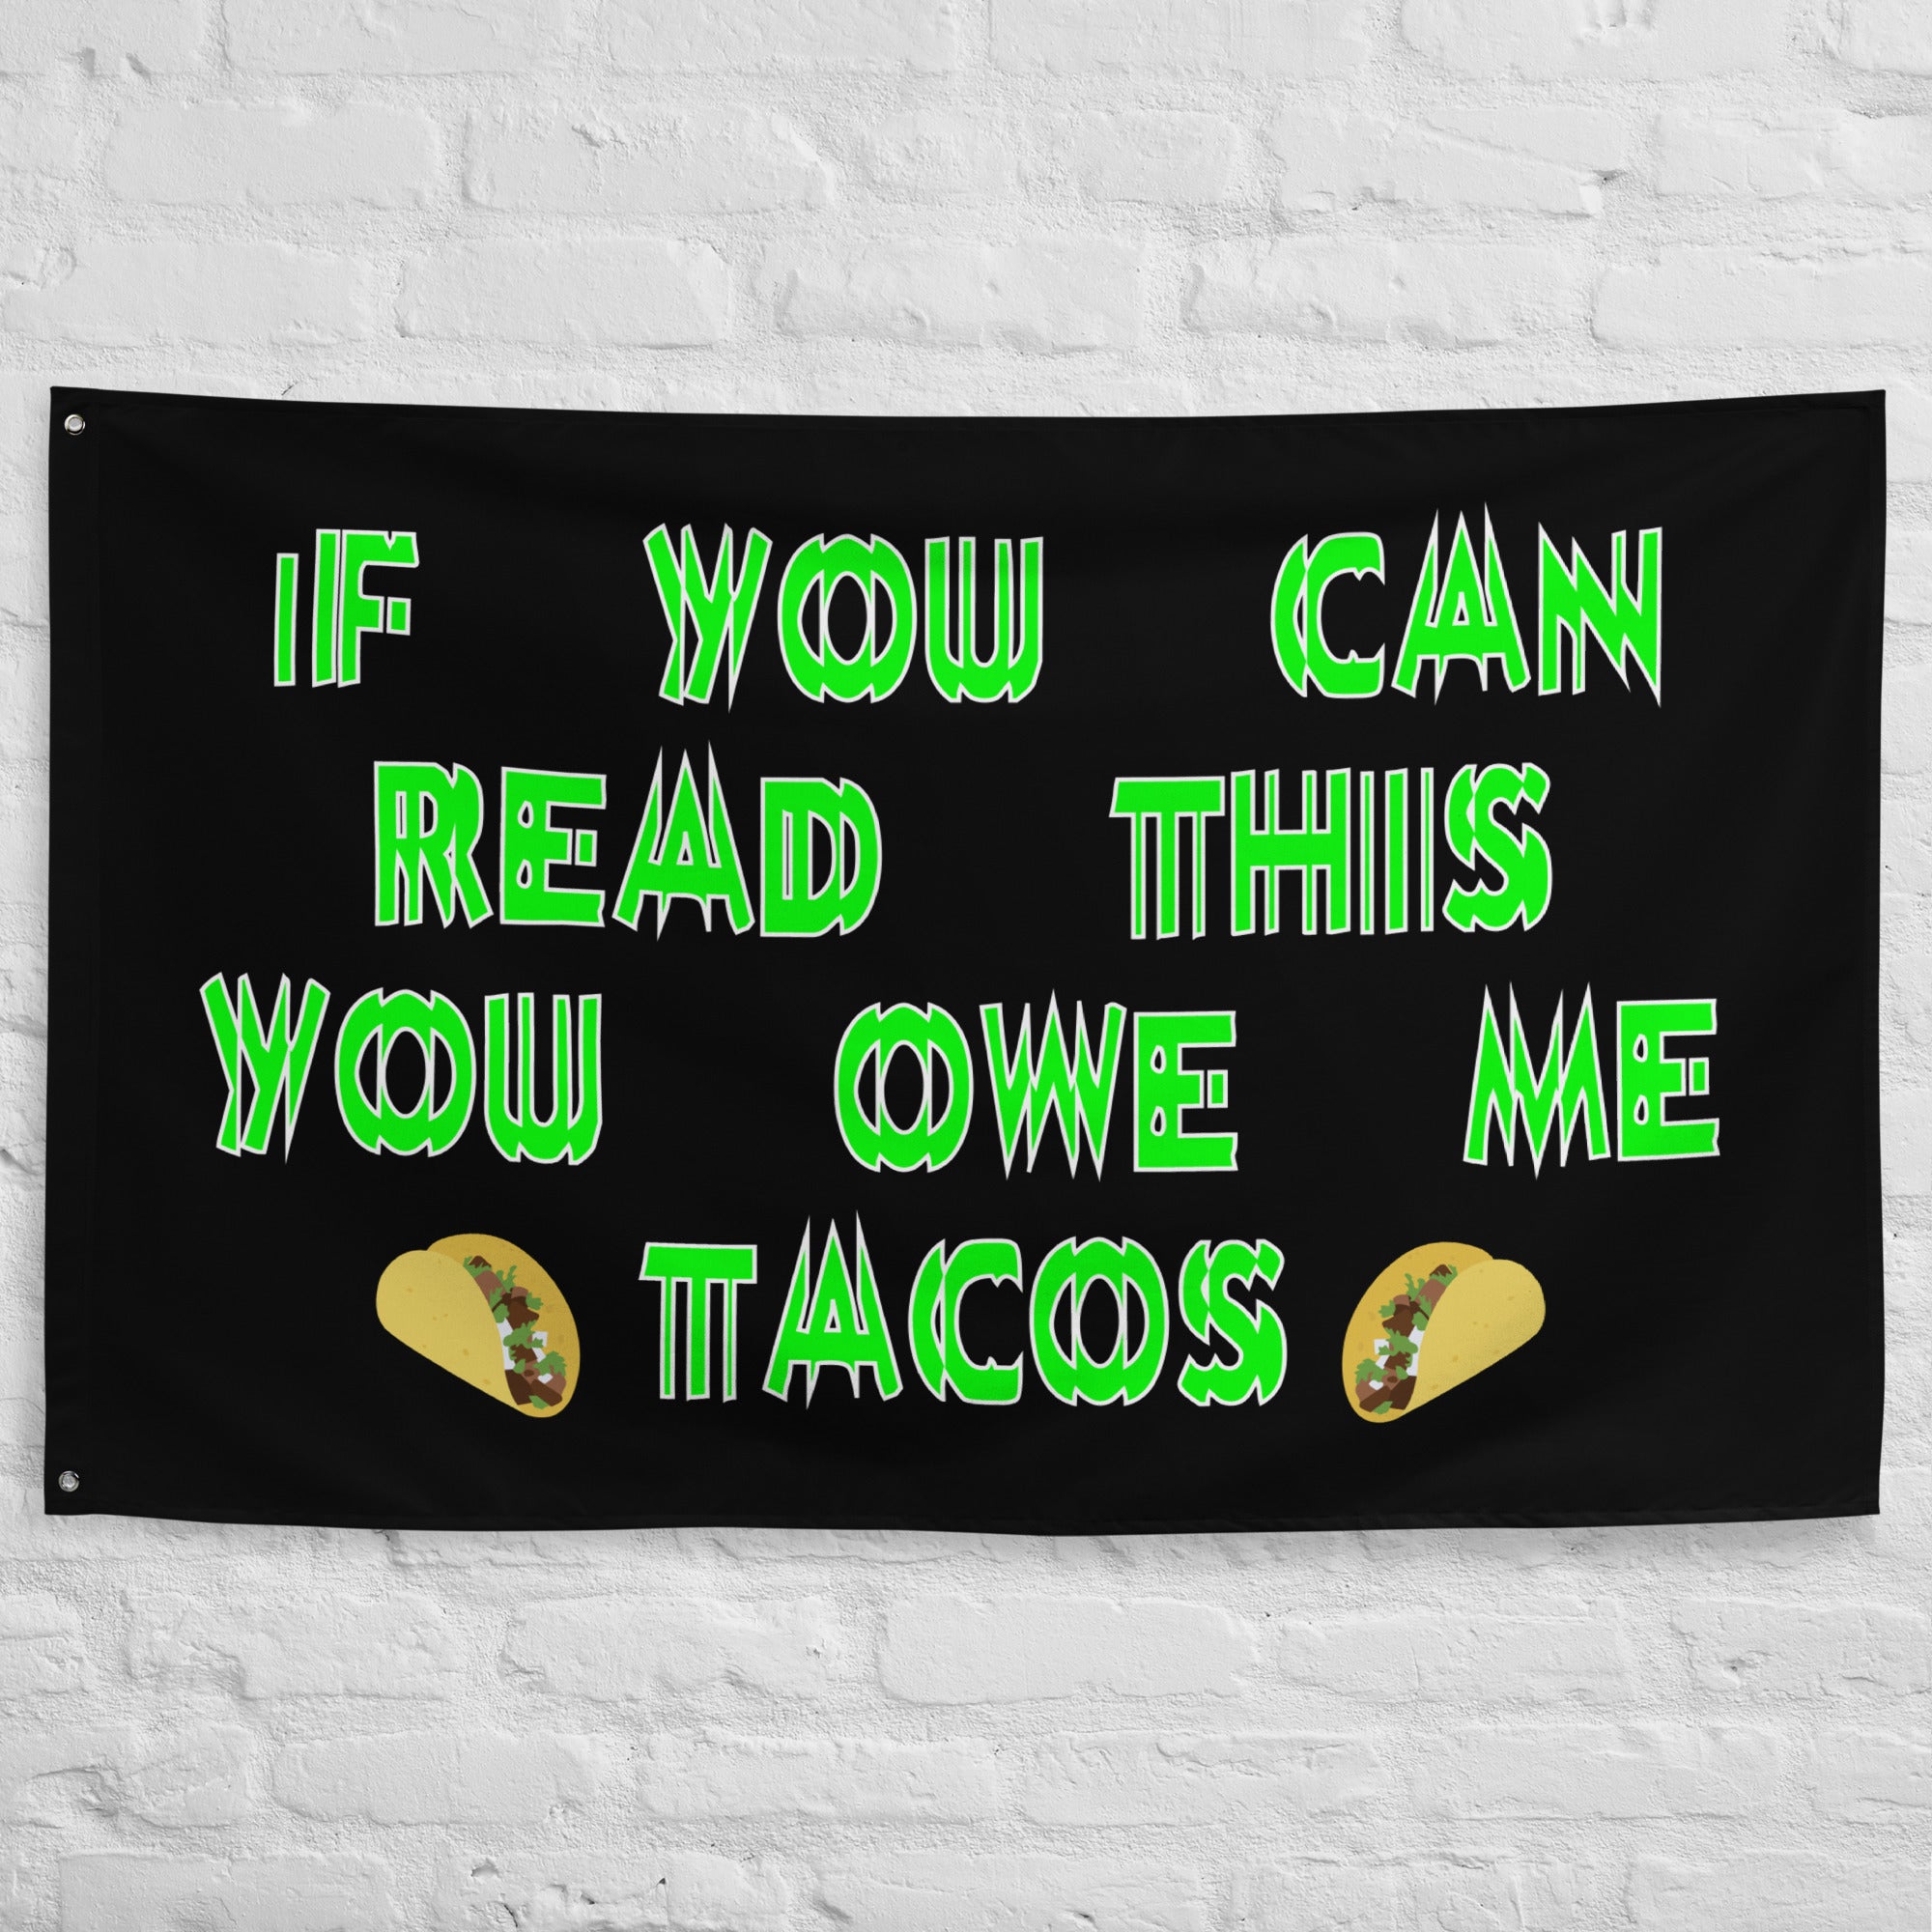 You Owe Me Tacos Rave Flag, Flag, - One Stop Rave